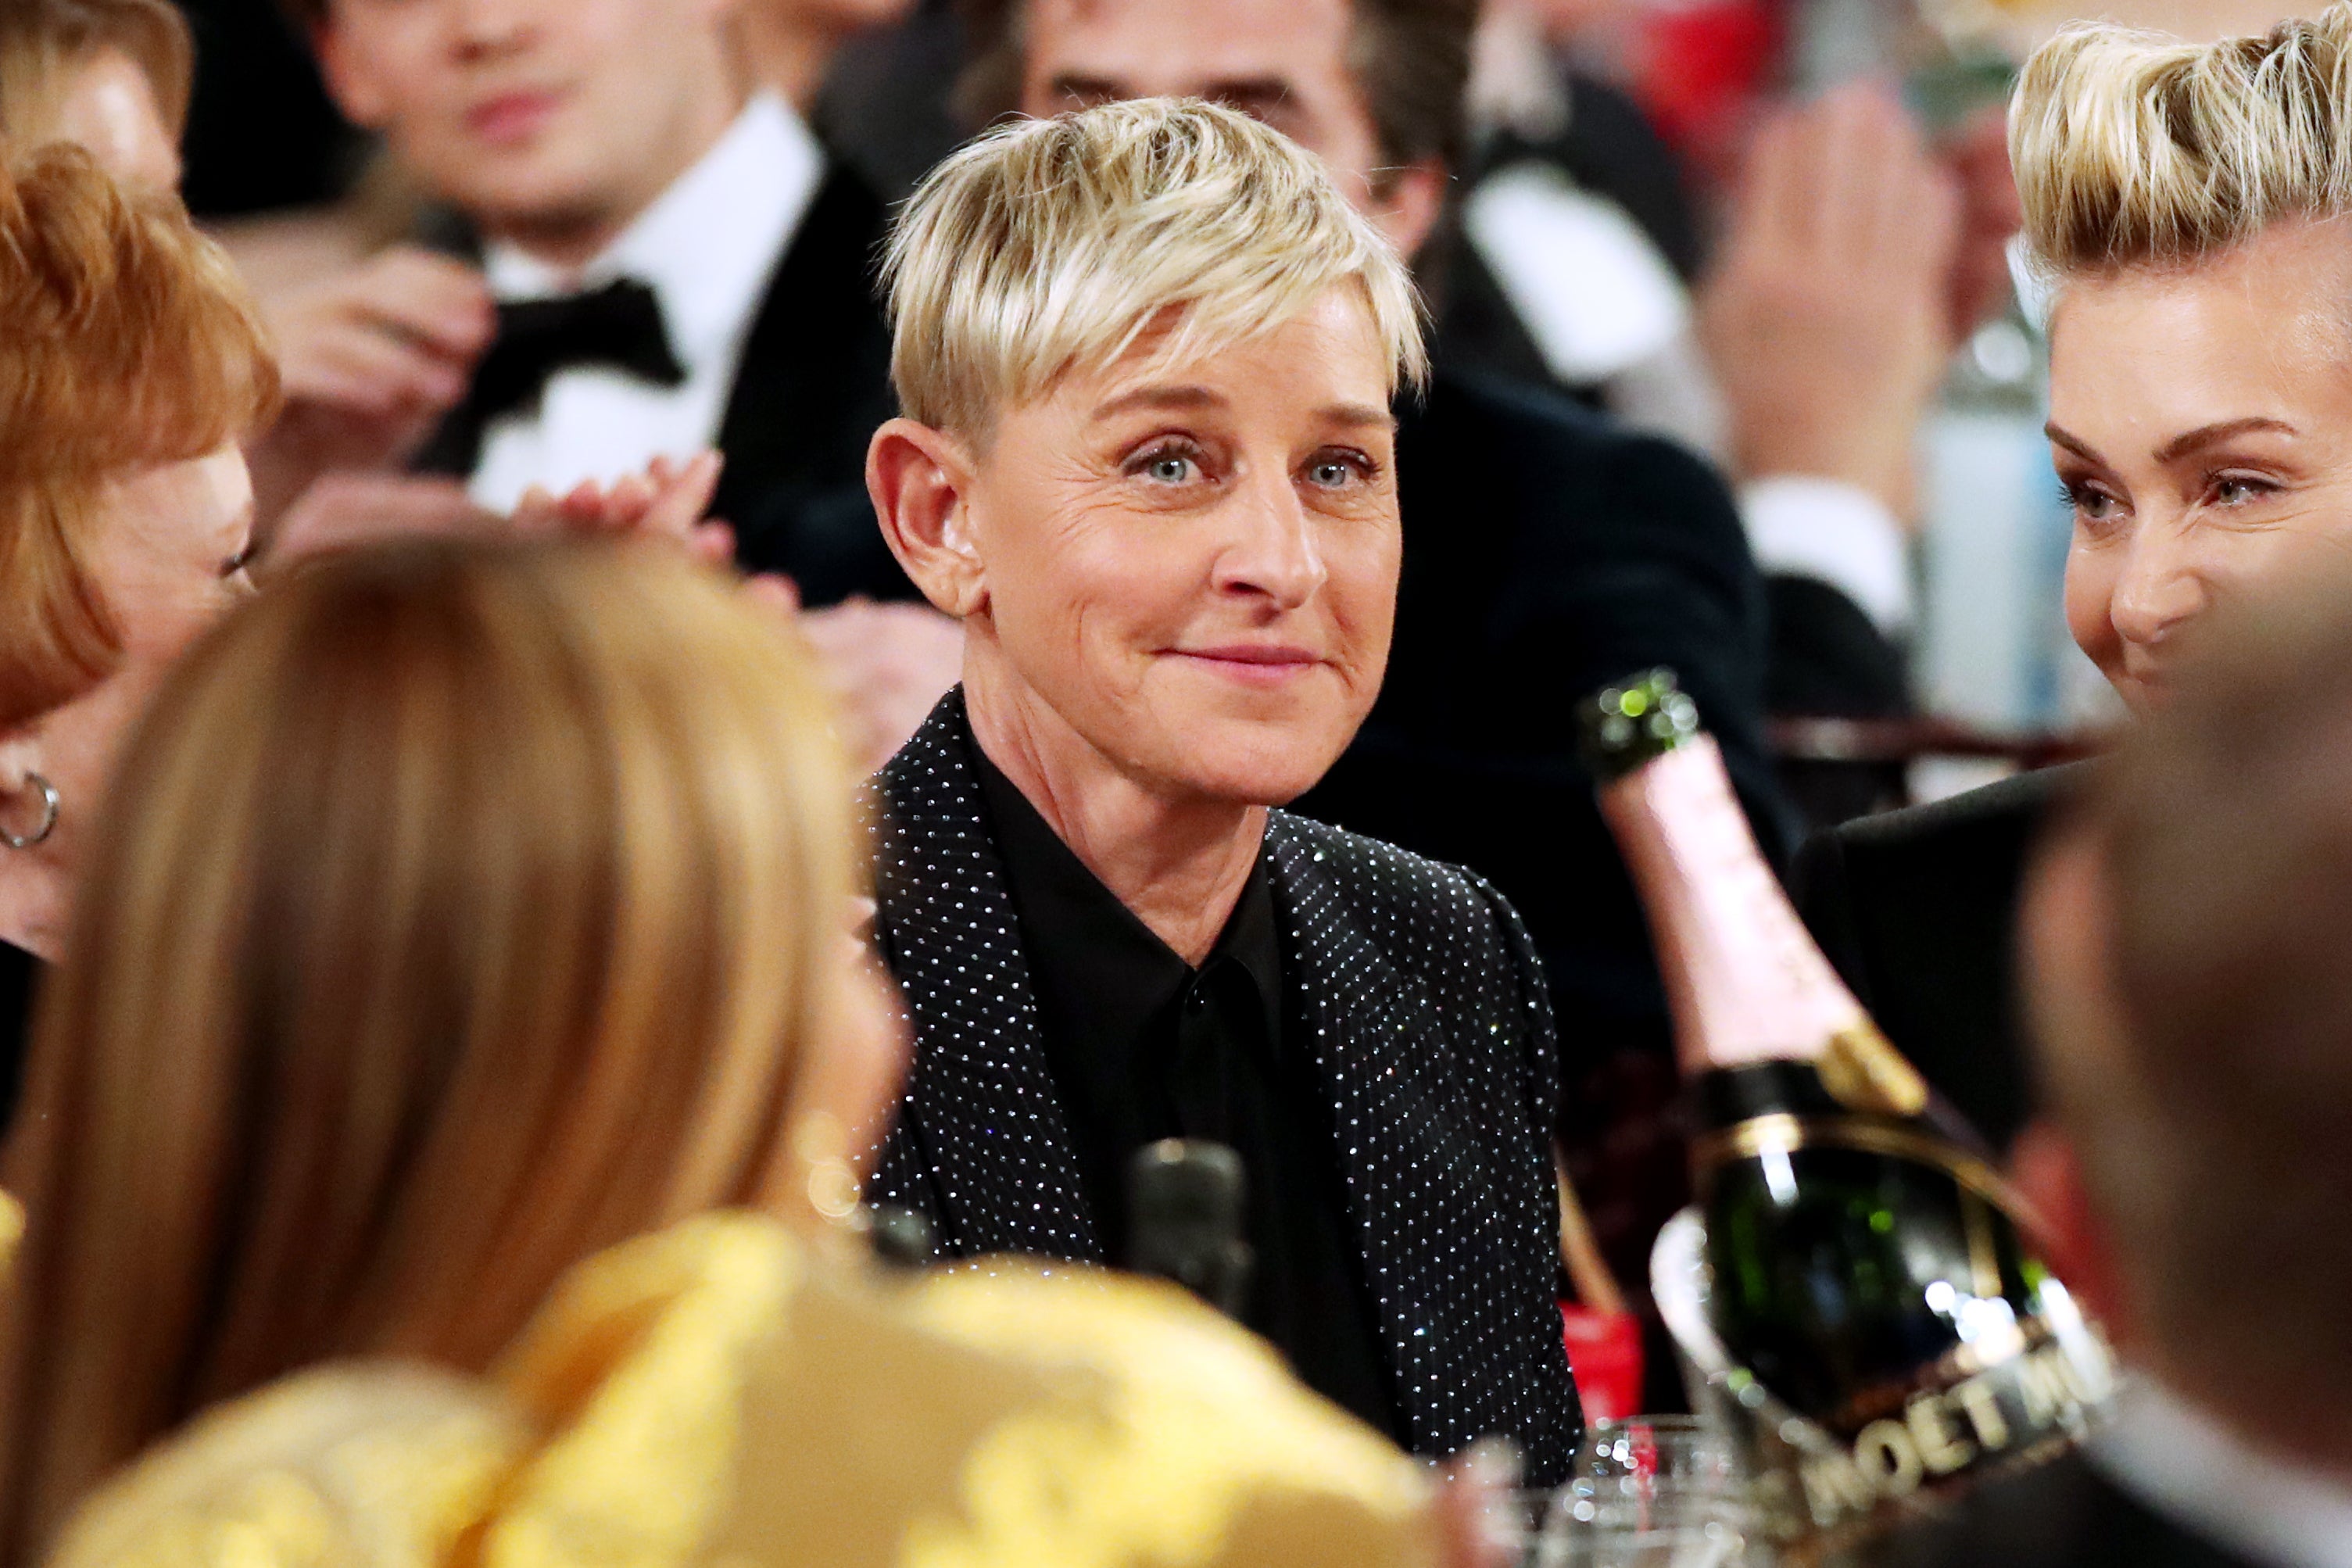 After Her Reputation Was Tarnished By Toxic Workplace Claims, Ellen DeGeneres Talked About Becoming The “Most Hated Person In America”